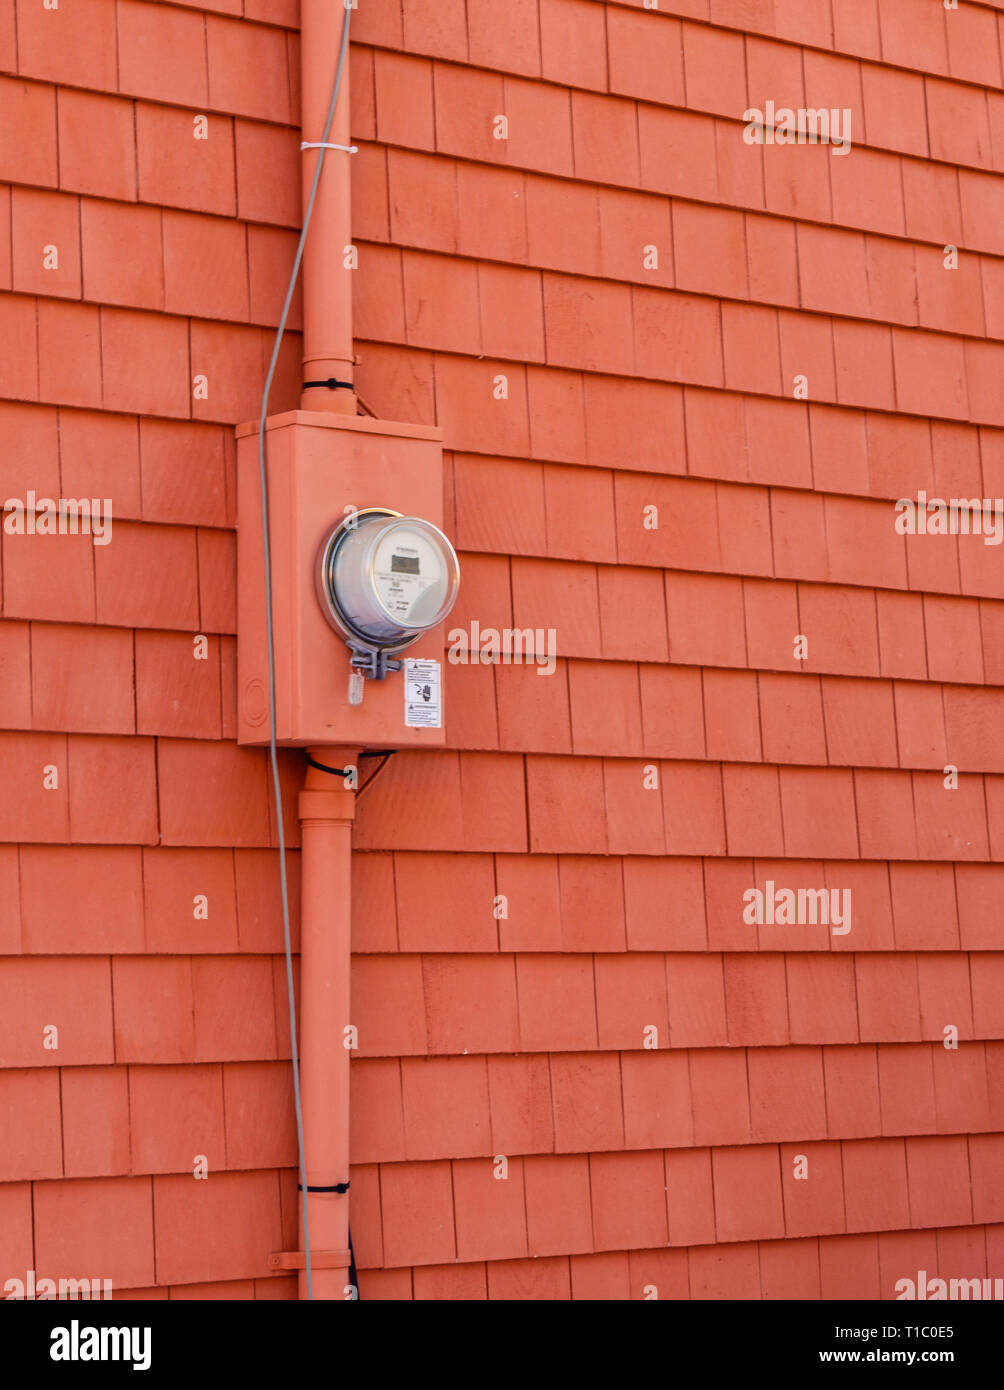 A red round digital electricity meter on cedar shingles in Charlottetown, Prince Edward Island, Canada Stock Photo